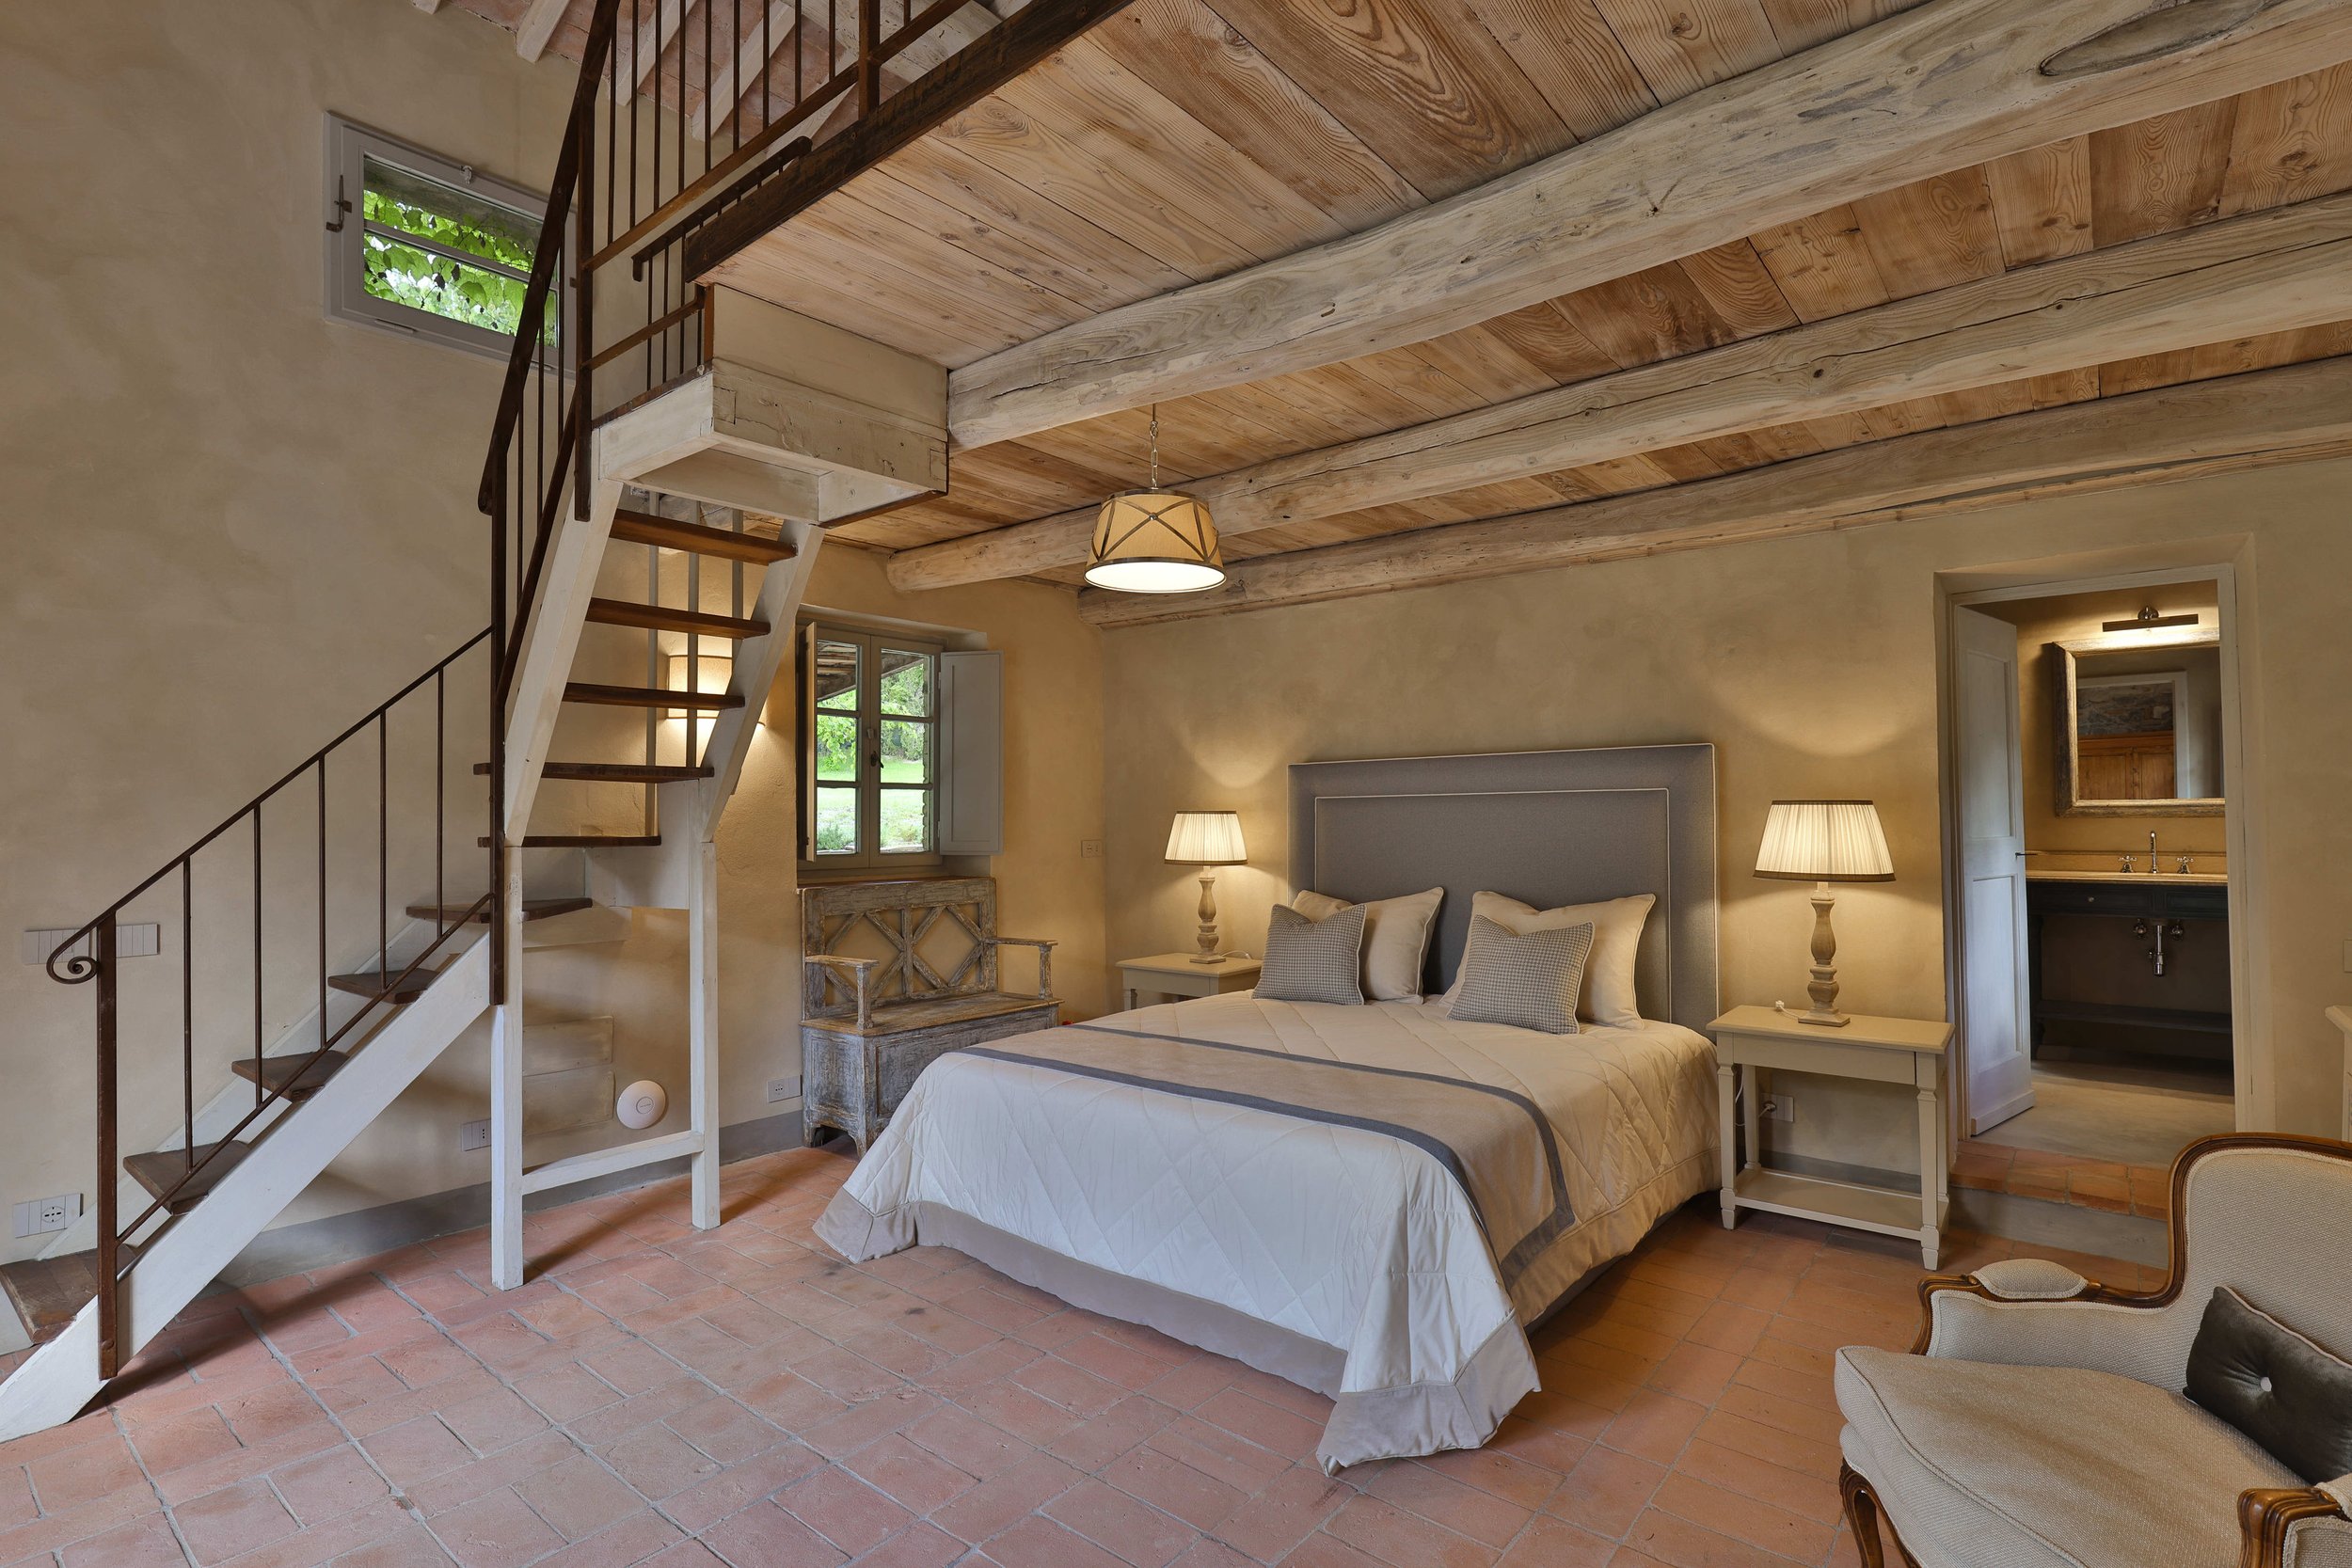 Francis York NEW Luxury Holiday Rental in the Chianti Hills, Tuscany Booking This Summer  26.jpg